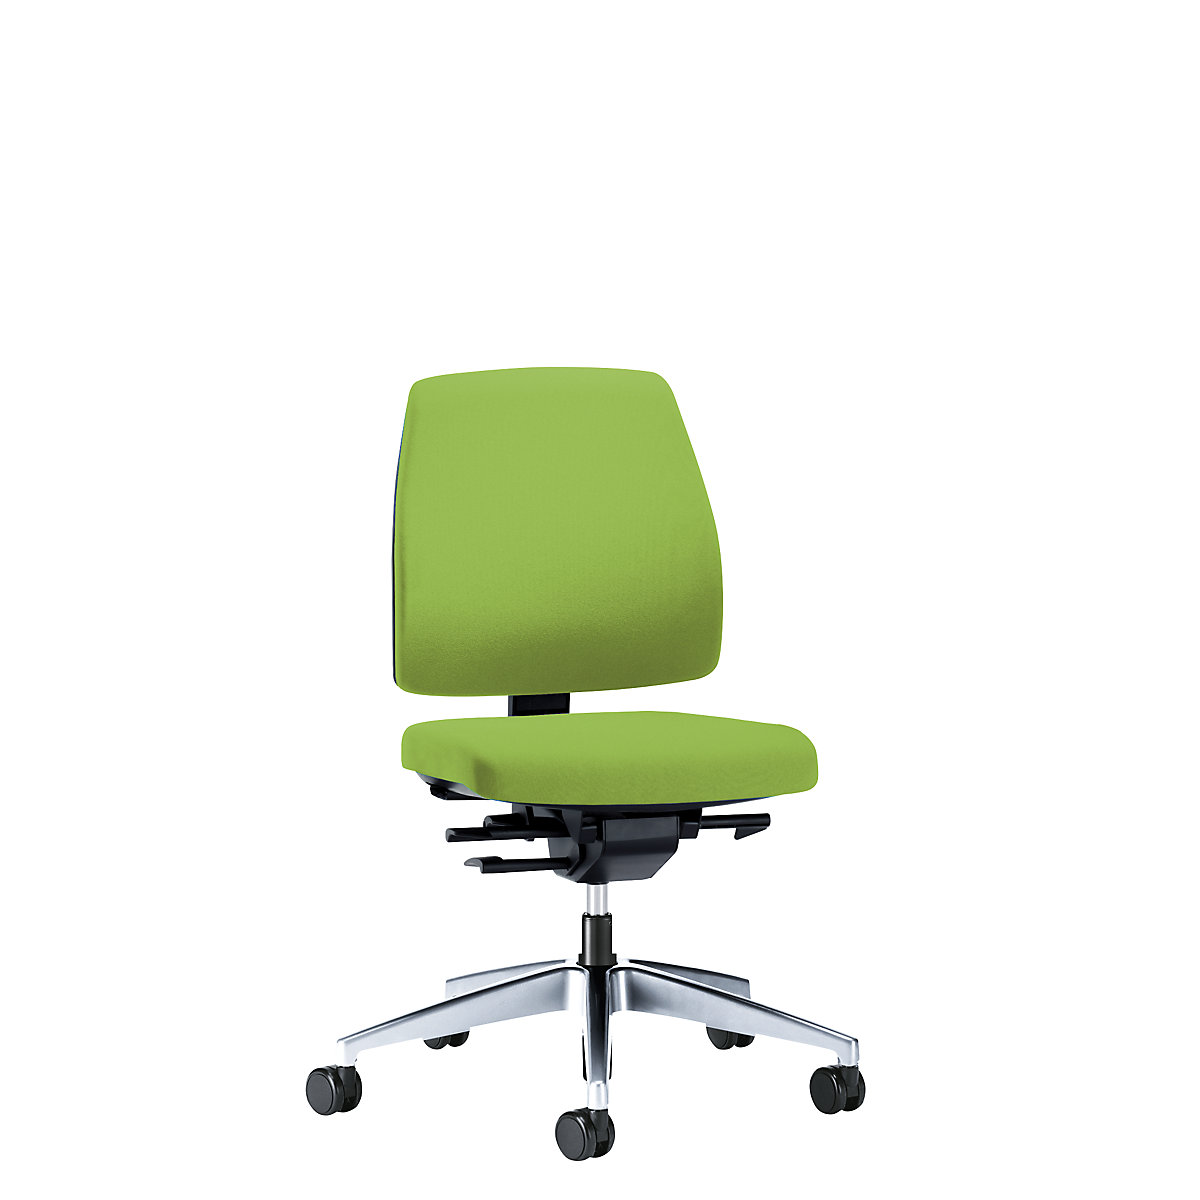 GOAL office swivel chair, back rest height 430 mm – interstuhl, polished frame, with soft castors, yellow green, seat depth 410 mm-5